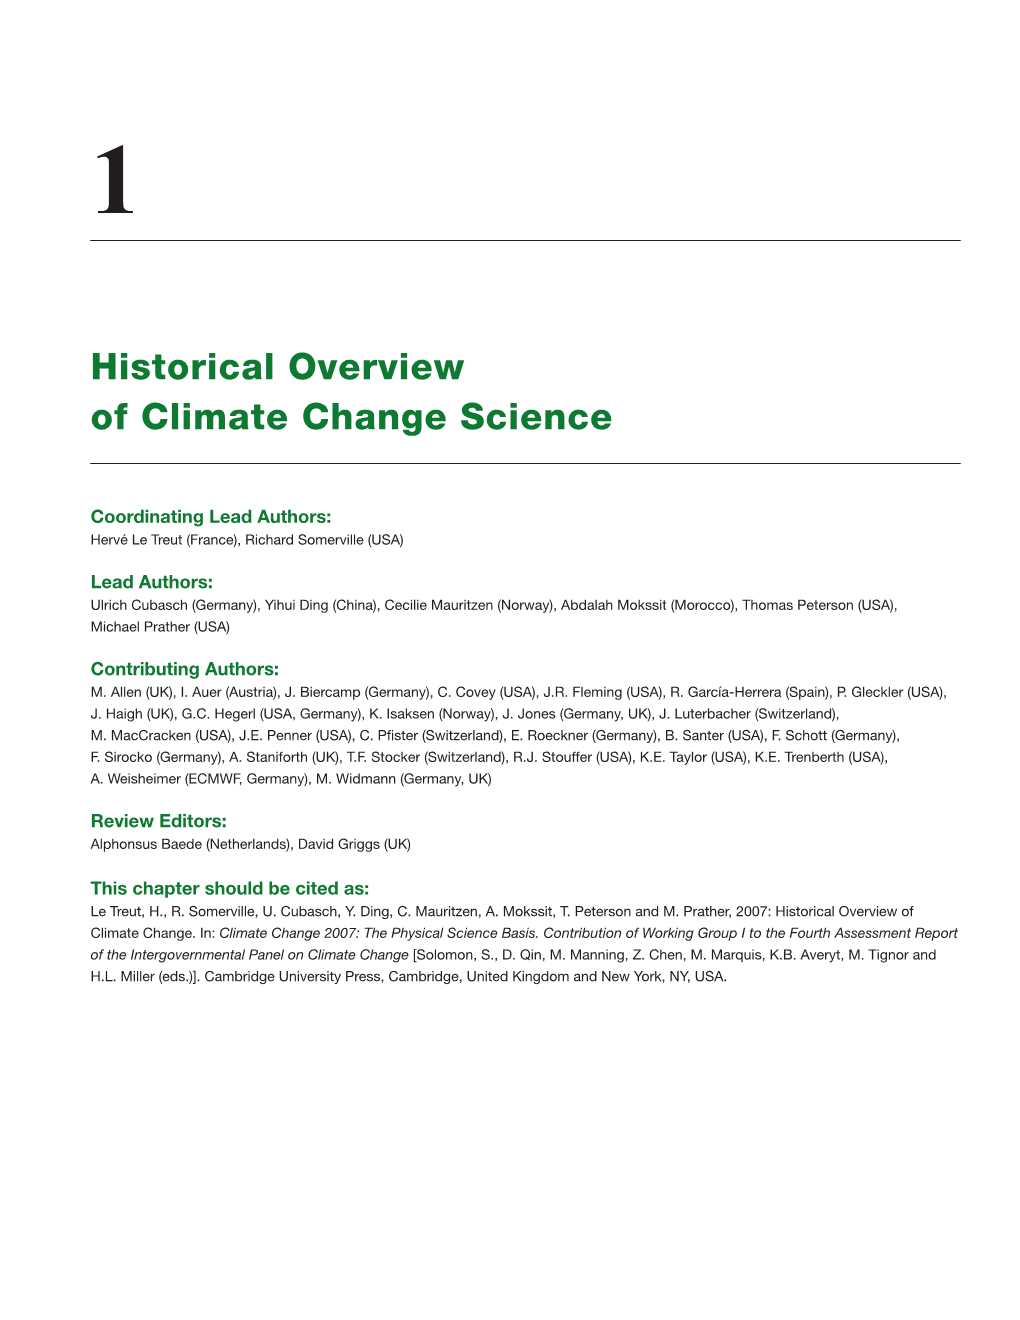 Historical Overview of Climate Change Science